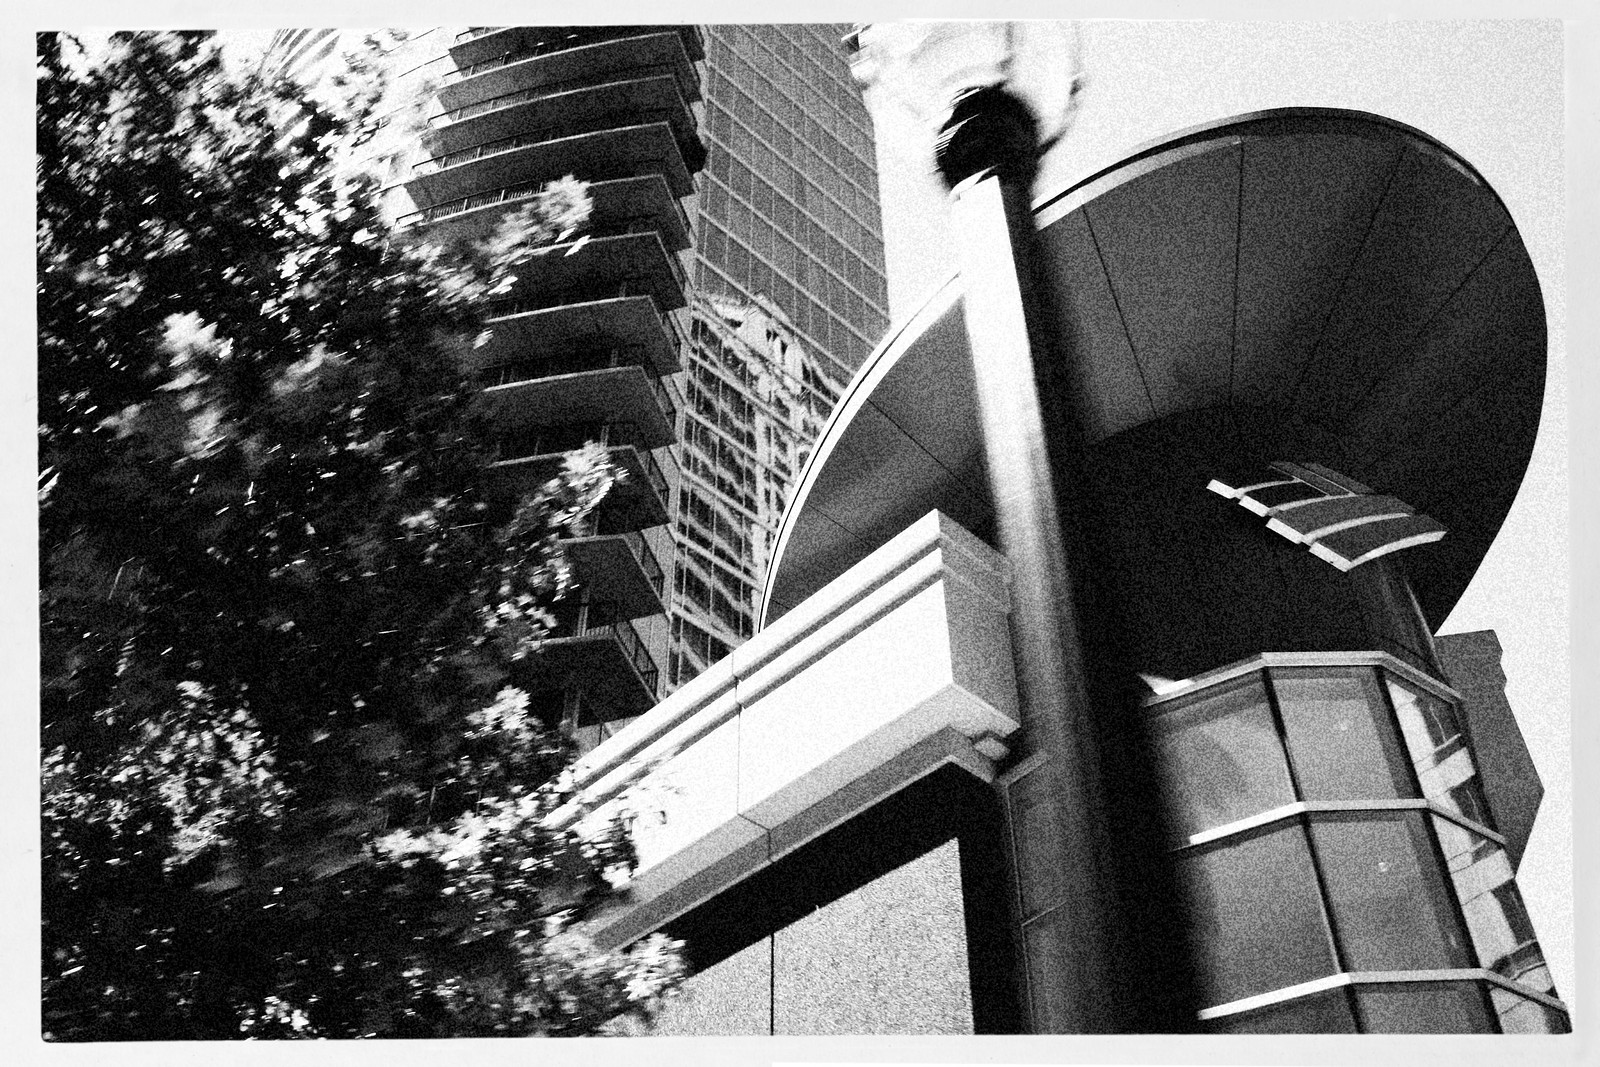 1010 Midtown Building, Atlanta, Peachtree and 12th Streets